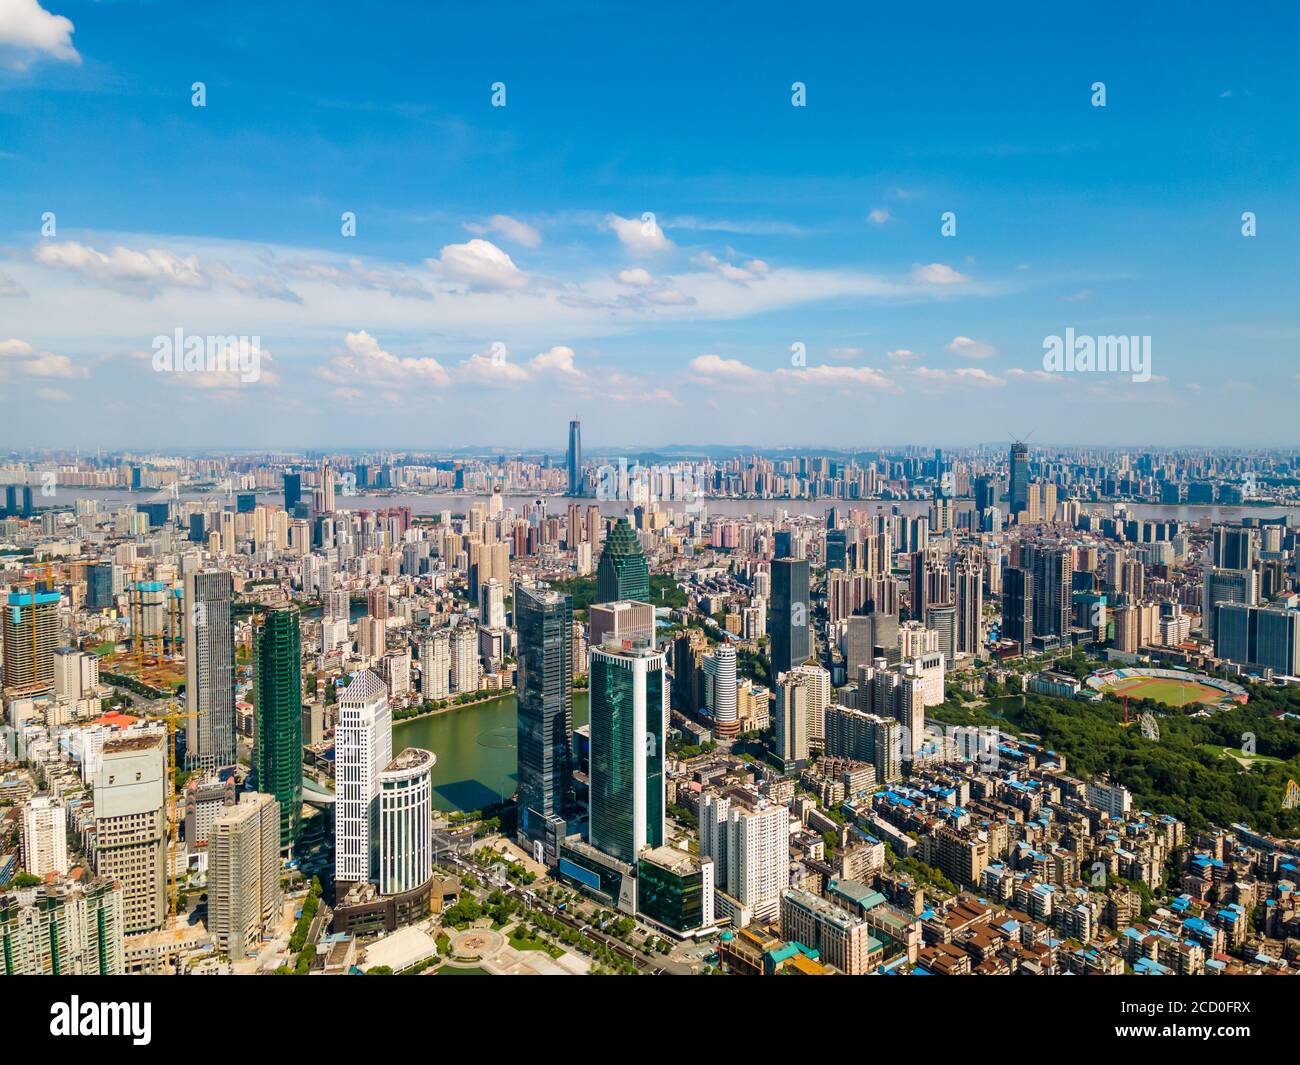 Aerial view of Wuhan skyline and Yangtze river with supertall skyscraper under construction in Wuhan Hubei China. Stock Photo